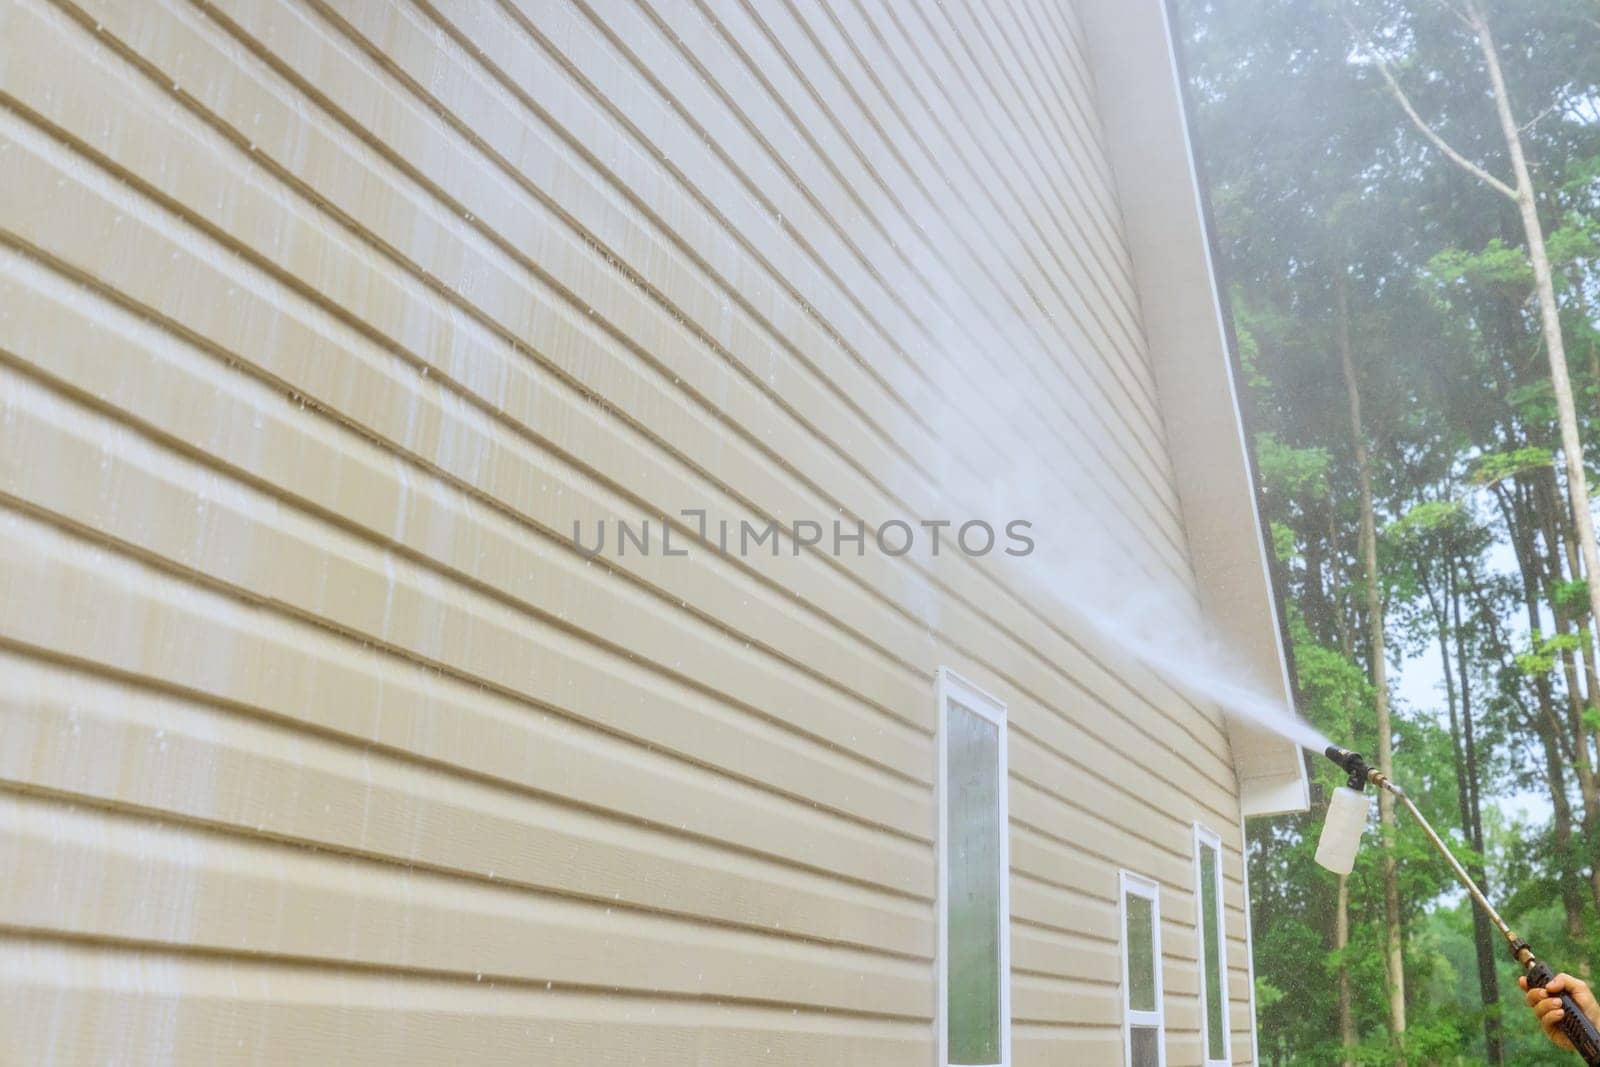 Service worker utilizes high pressure nozzles to efficiently clean siding houses with a water soap cleaner. by ungvar